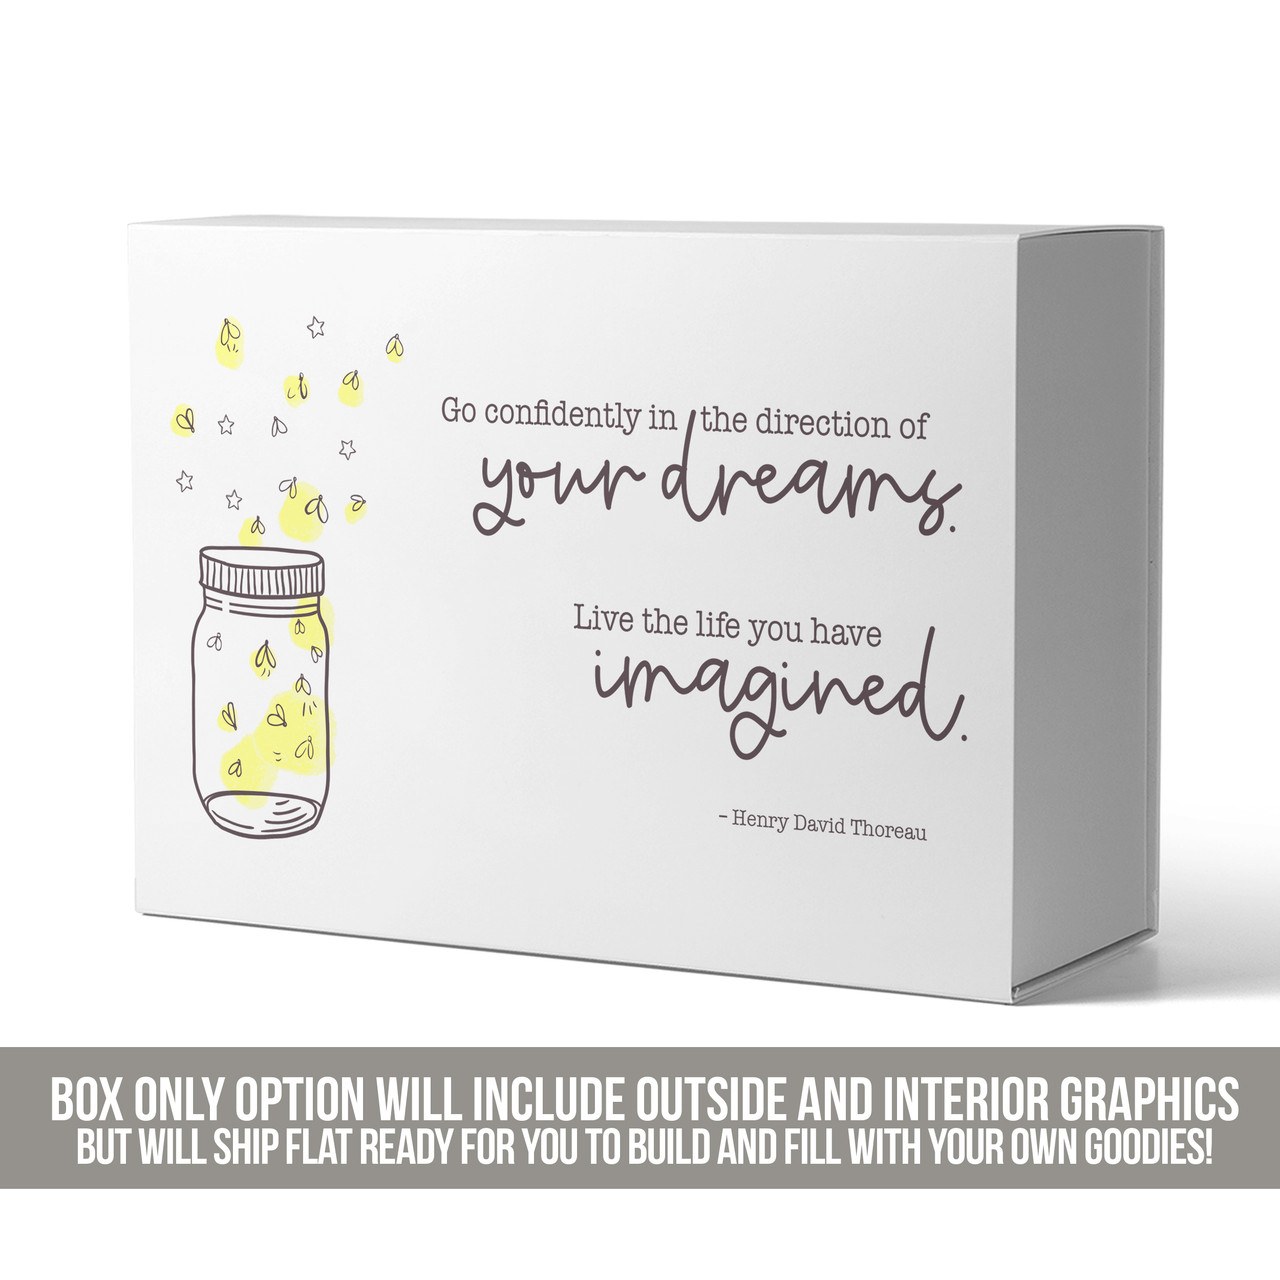 birthday gift, girlfriend birthday gift box with calming candle bath bomb  and drinkware option